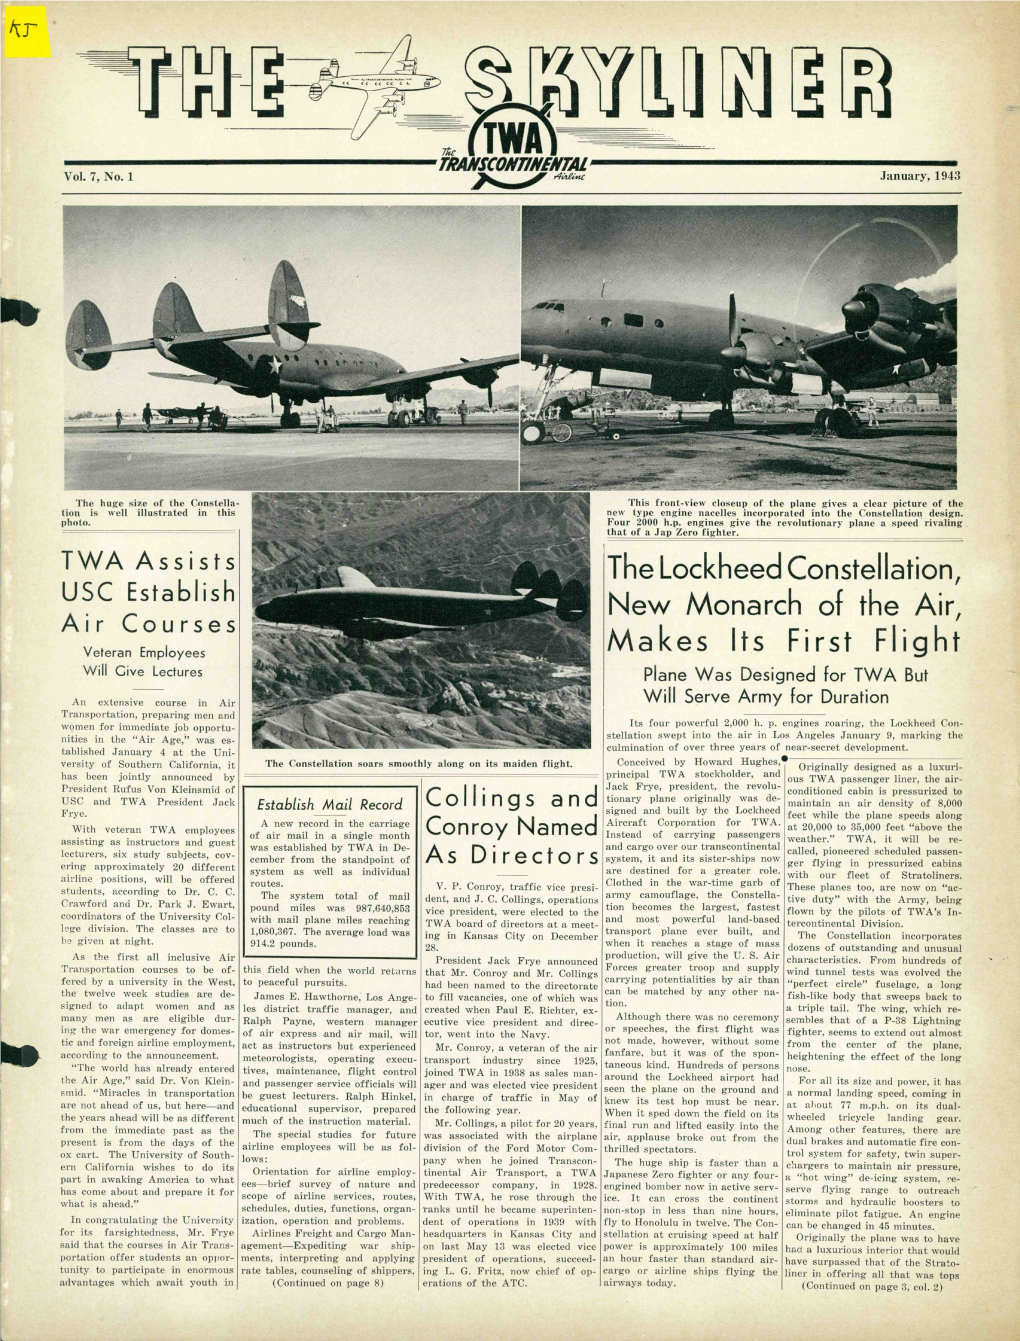 The Lockheed Constellation, New Monarch of the Air, Makes Its First